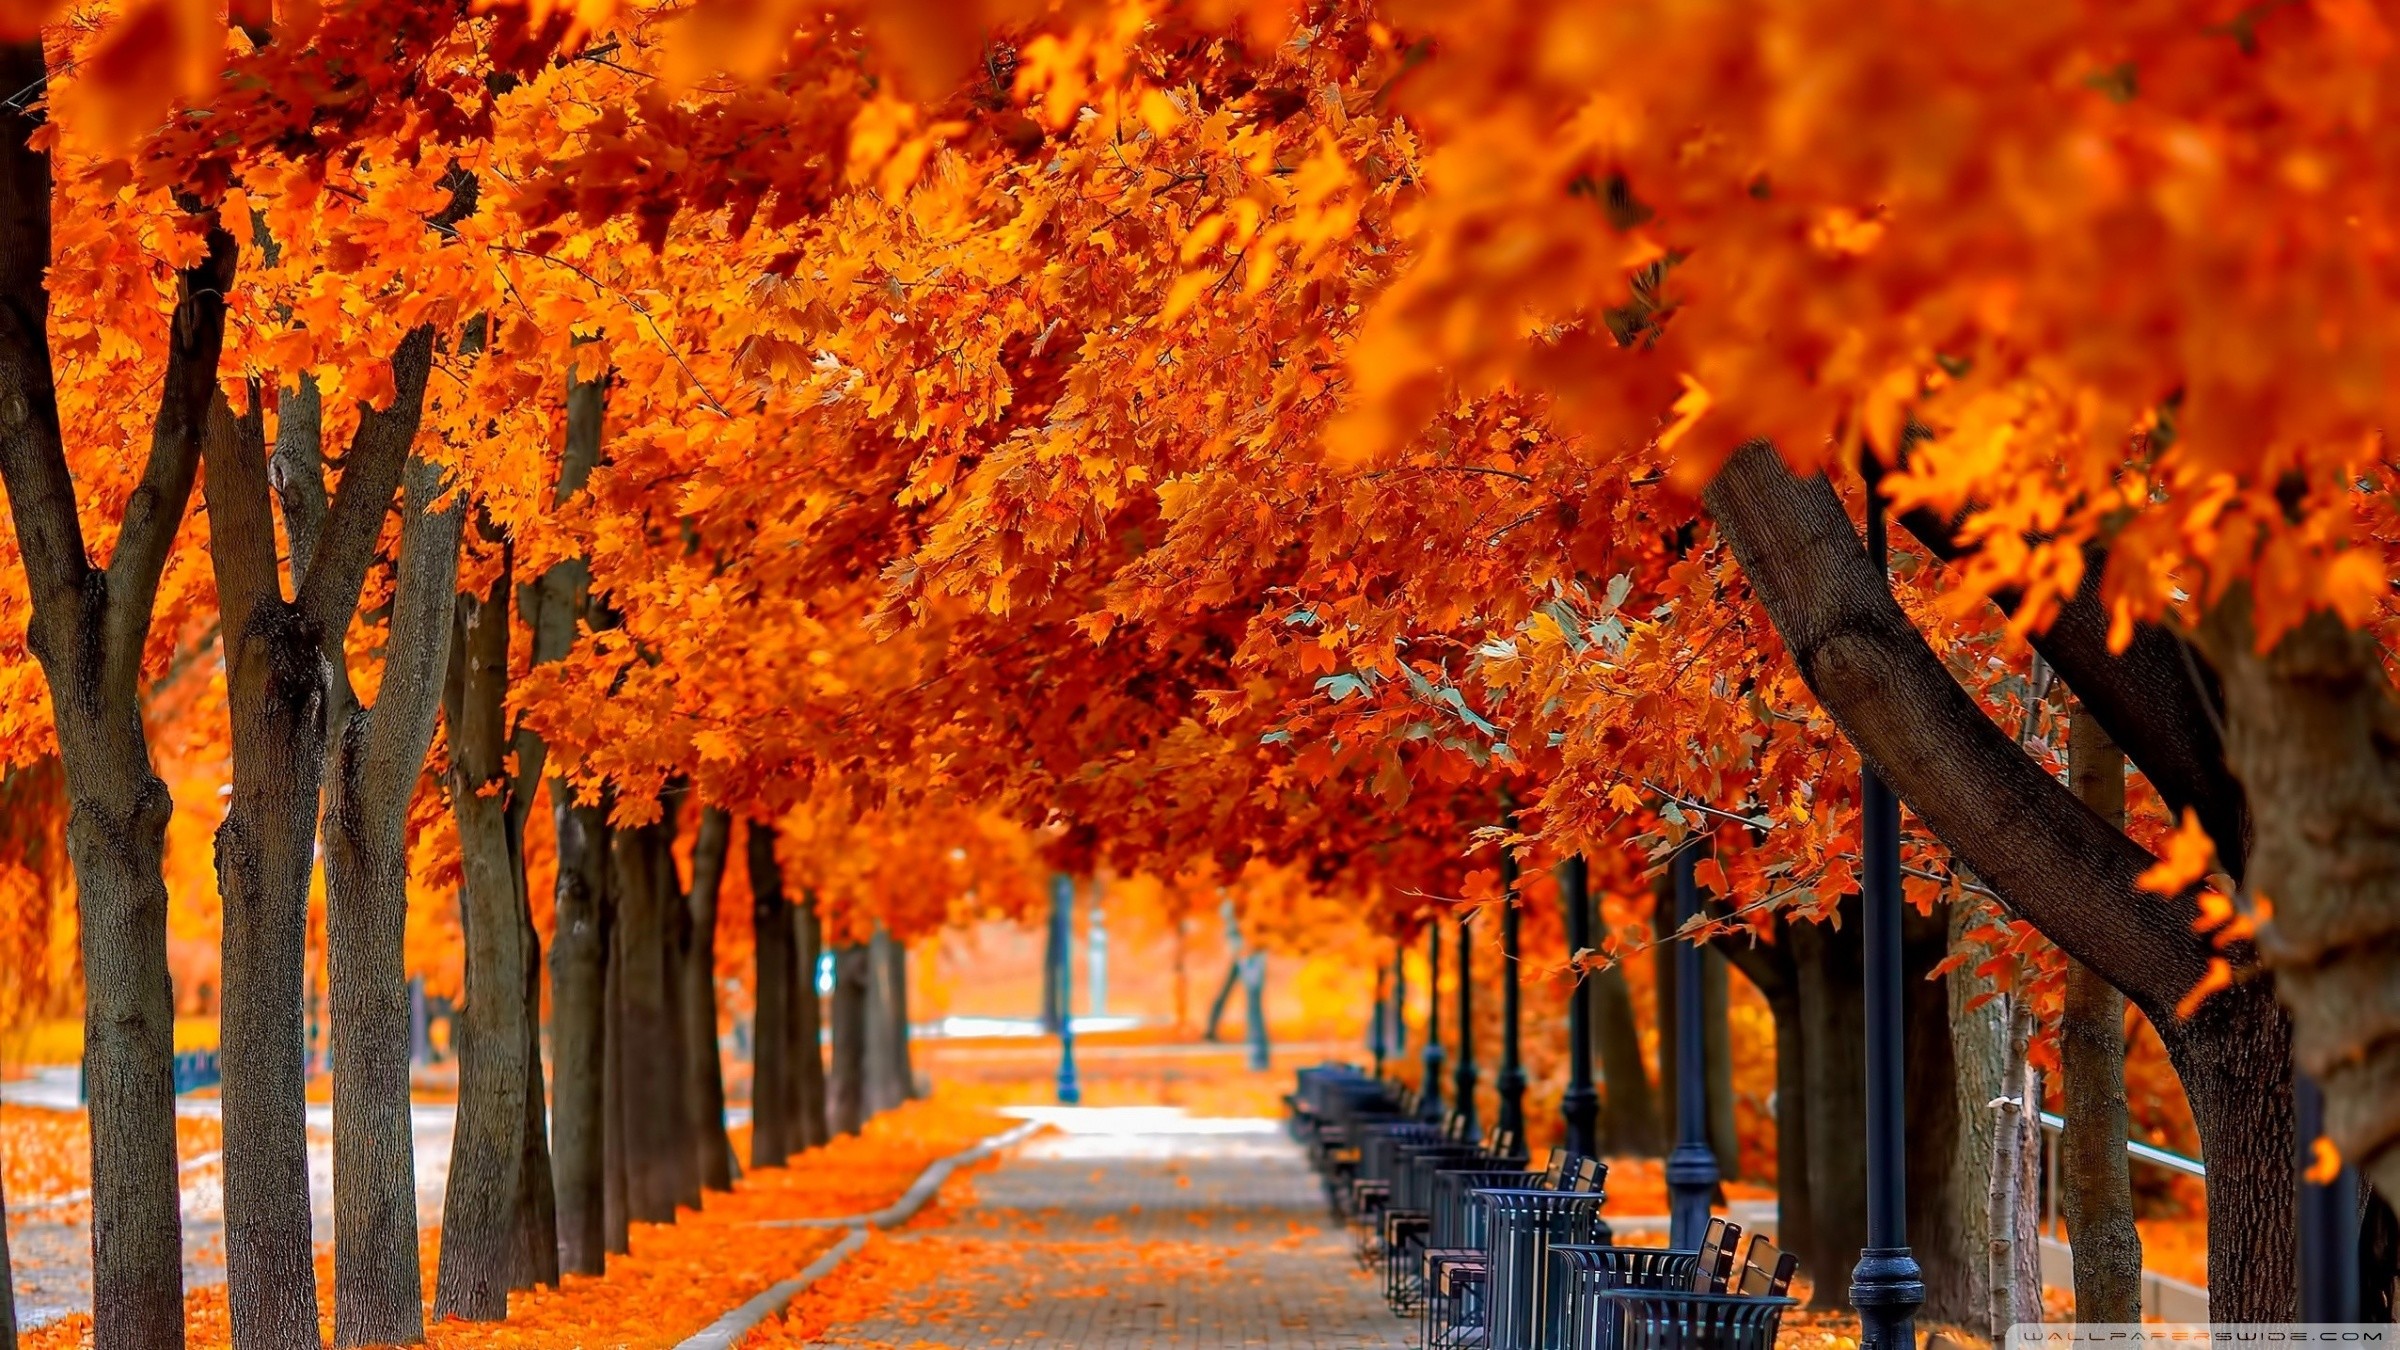 2400x1350 Wallpaper Fall nice hd wallpapers with red and orange colors